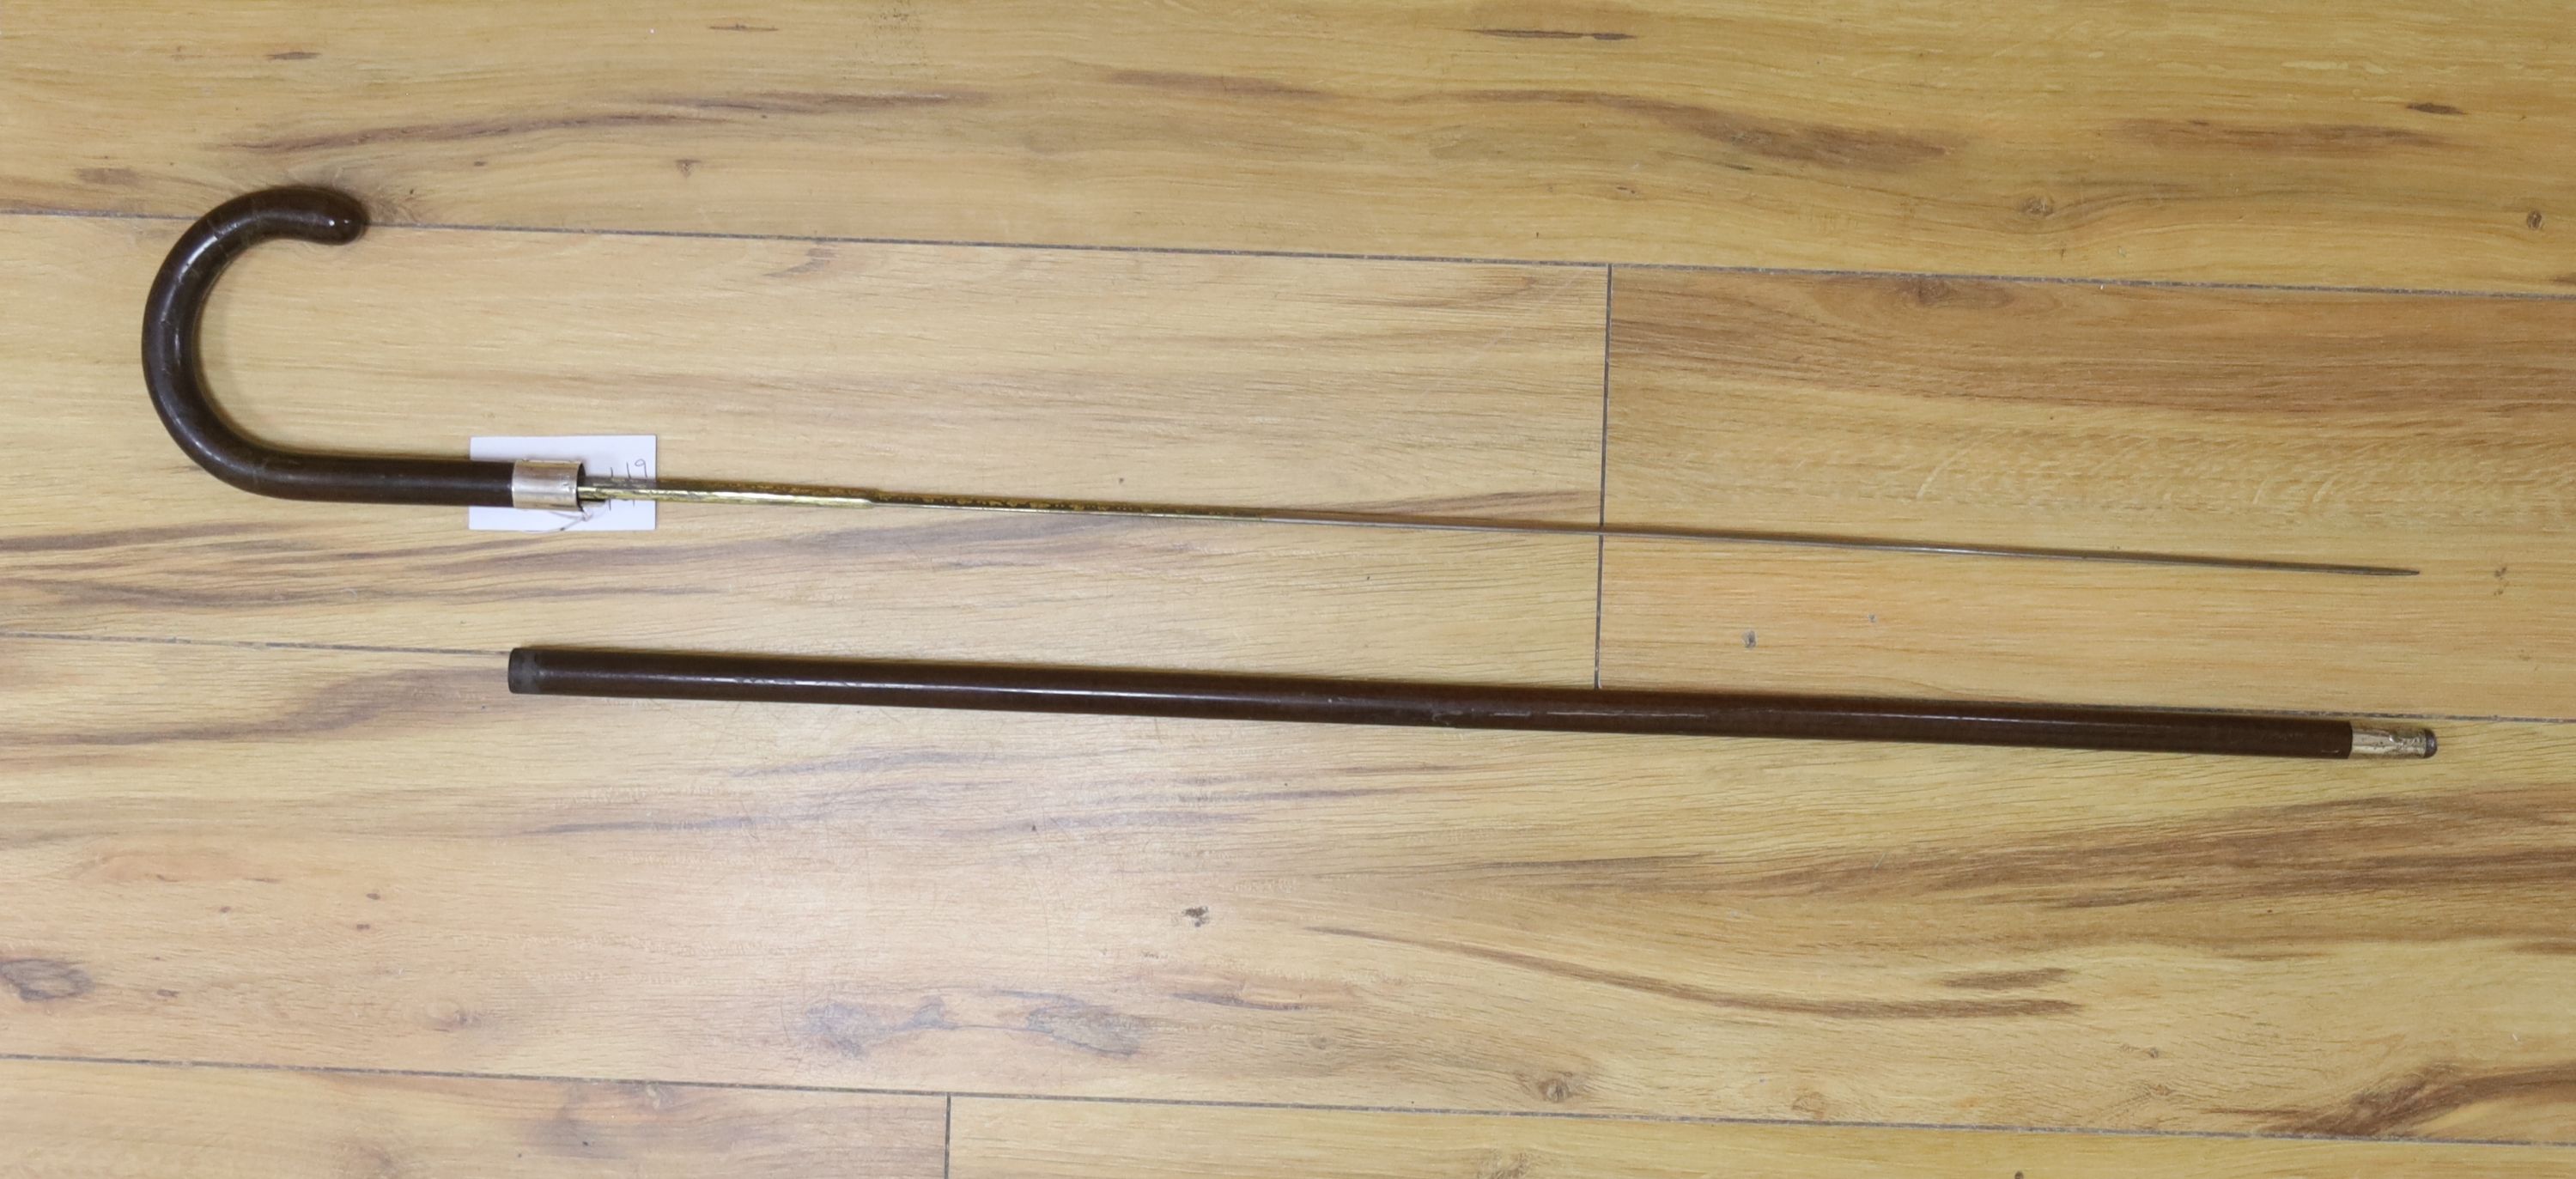 A French Toledo bladed swordstick, 19th century 87cm long